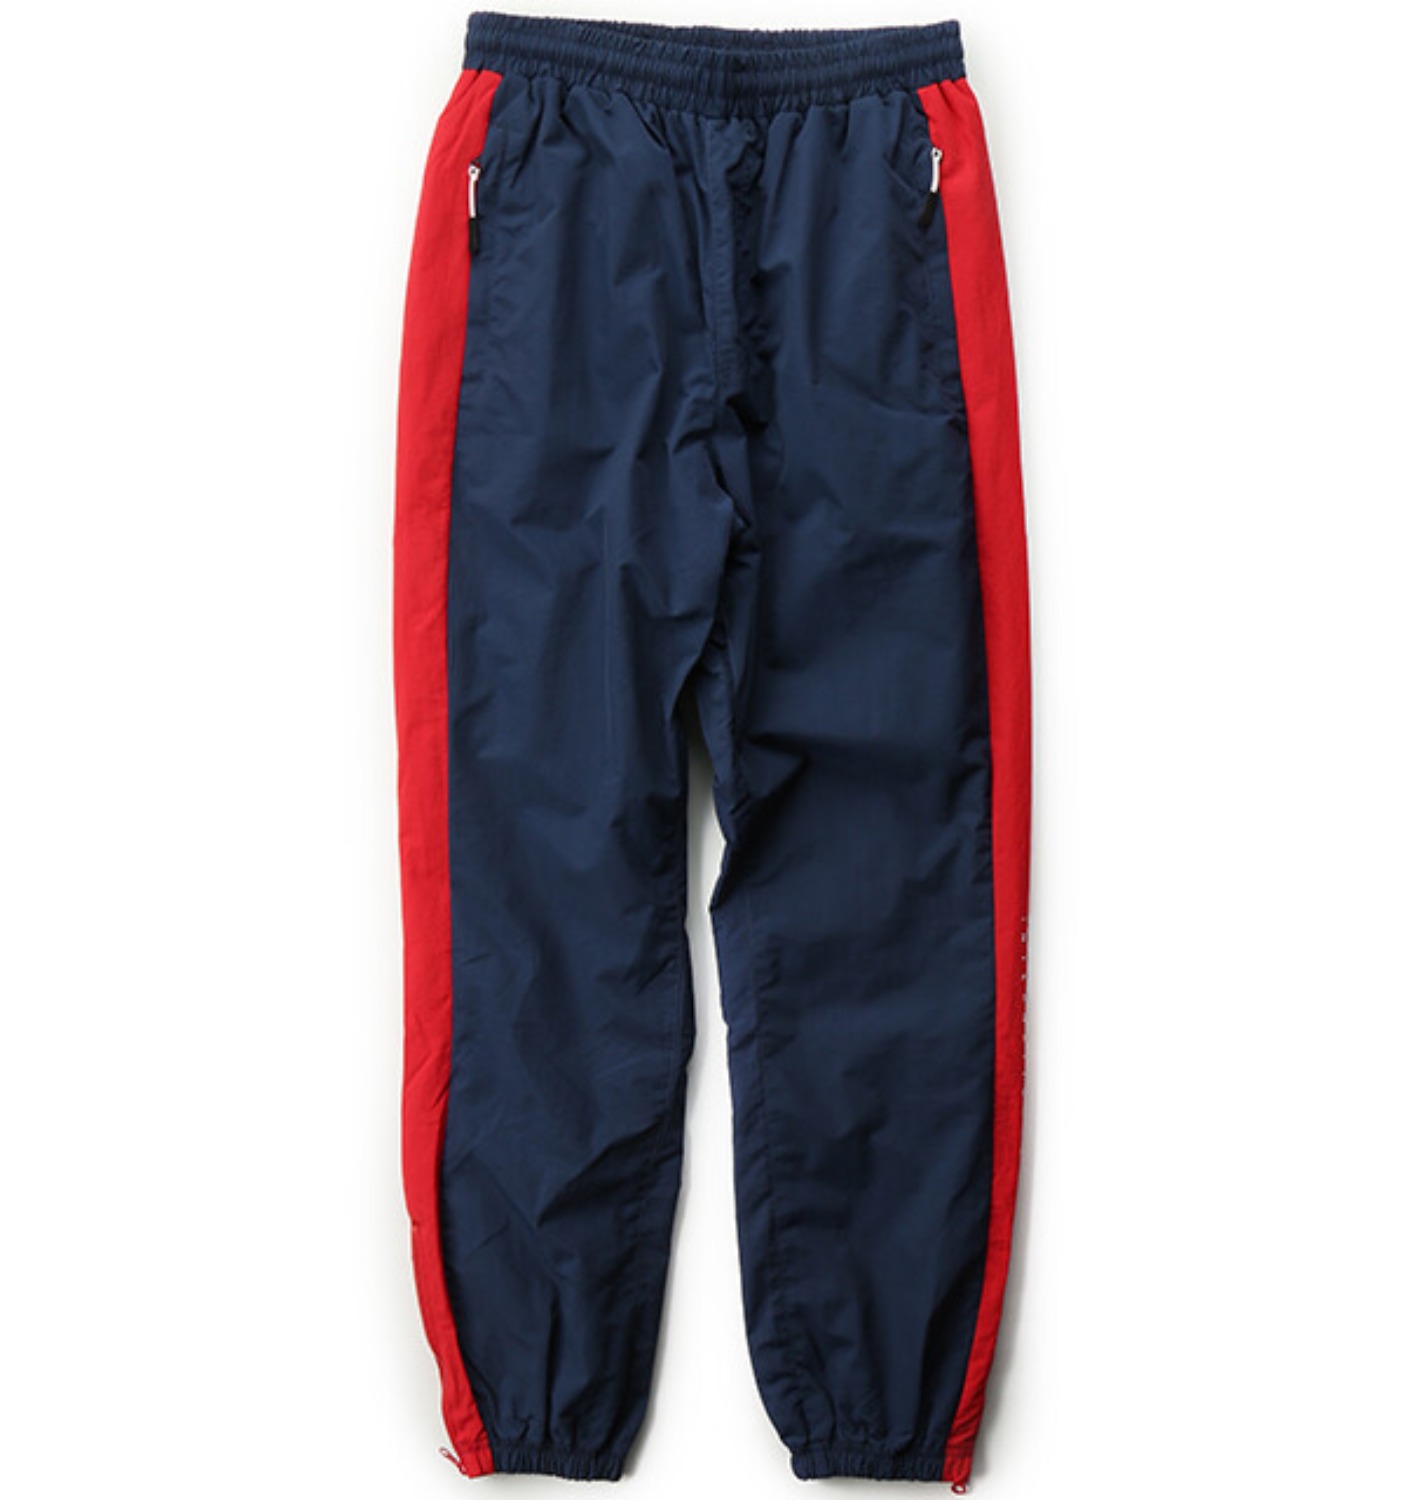 RUNNER TRACKSUIT PANT NAVY/RED